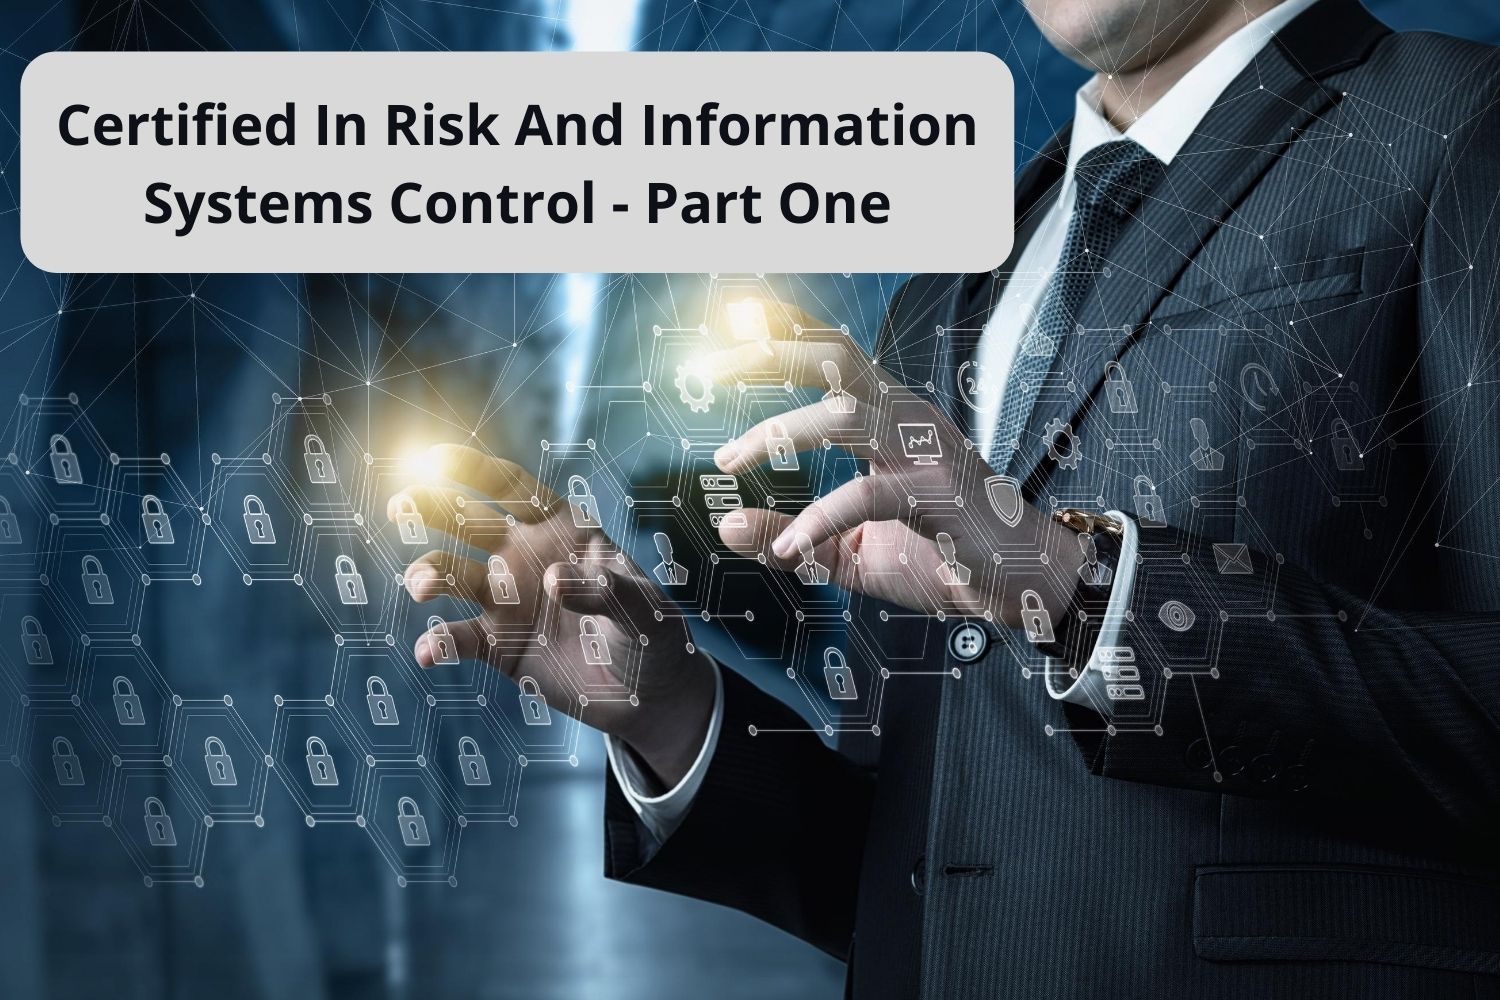 Foundational knowledge to perform an effective risk management program and prepare you for the Information Systems Audit and Control Association certification